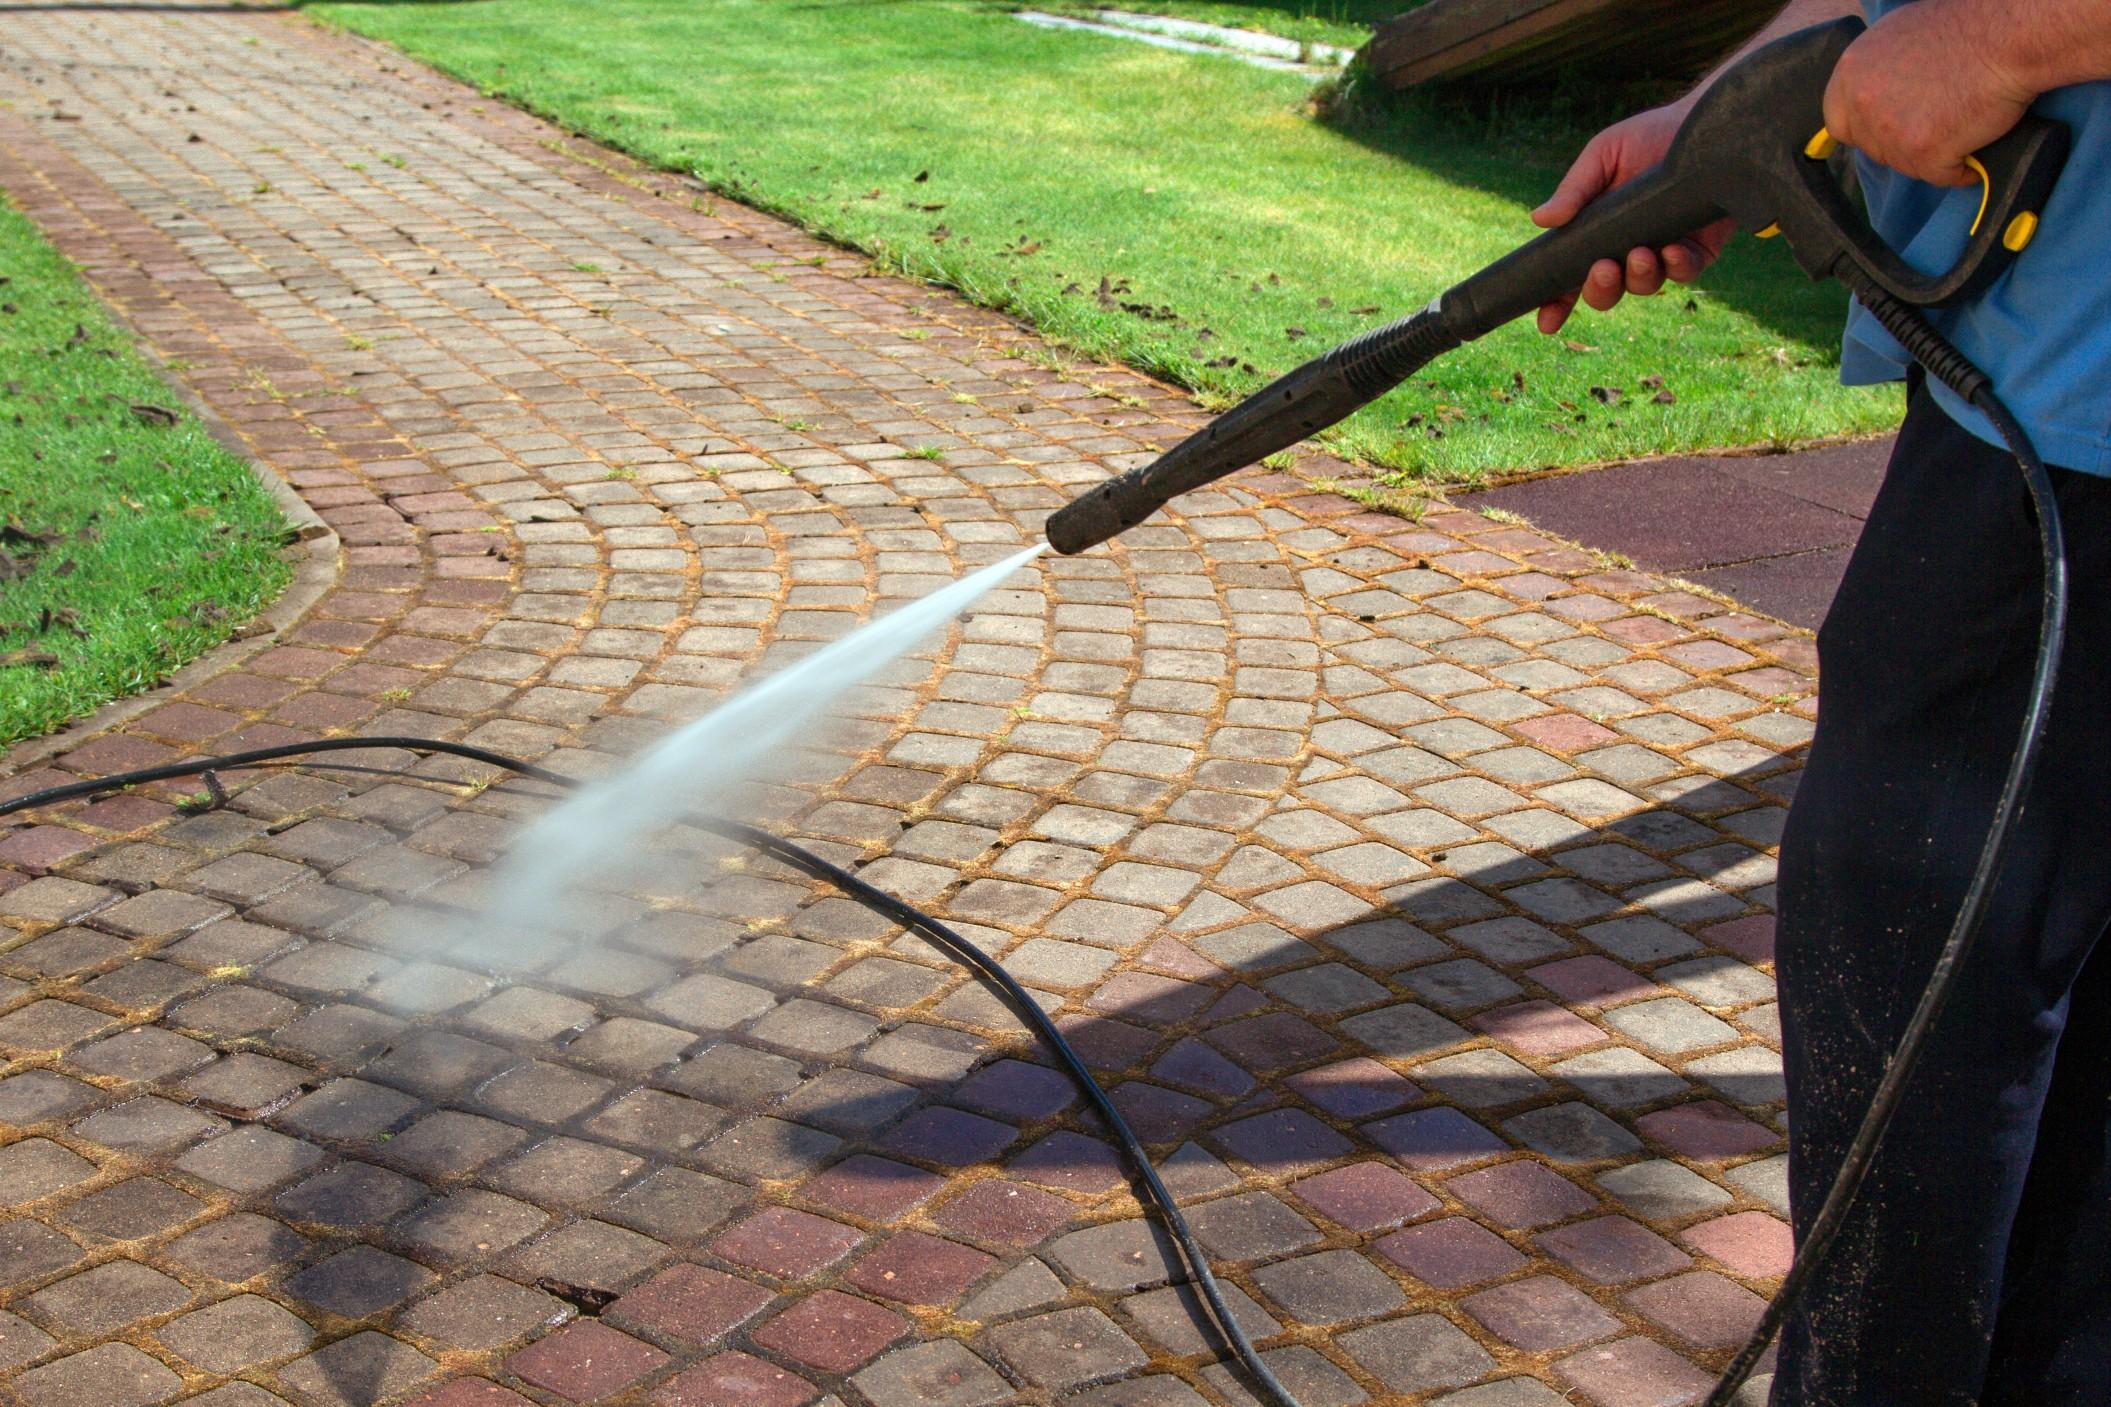 Pressure cleaning walkways, including stone or brick paths.